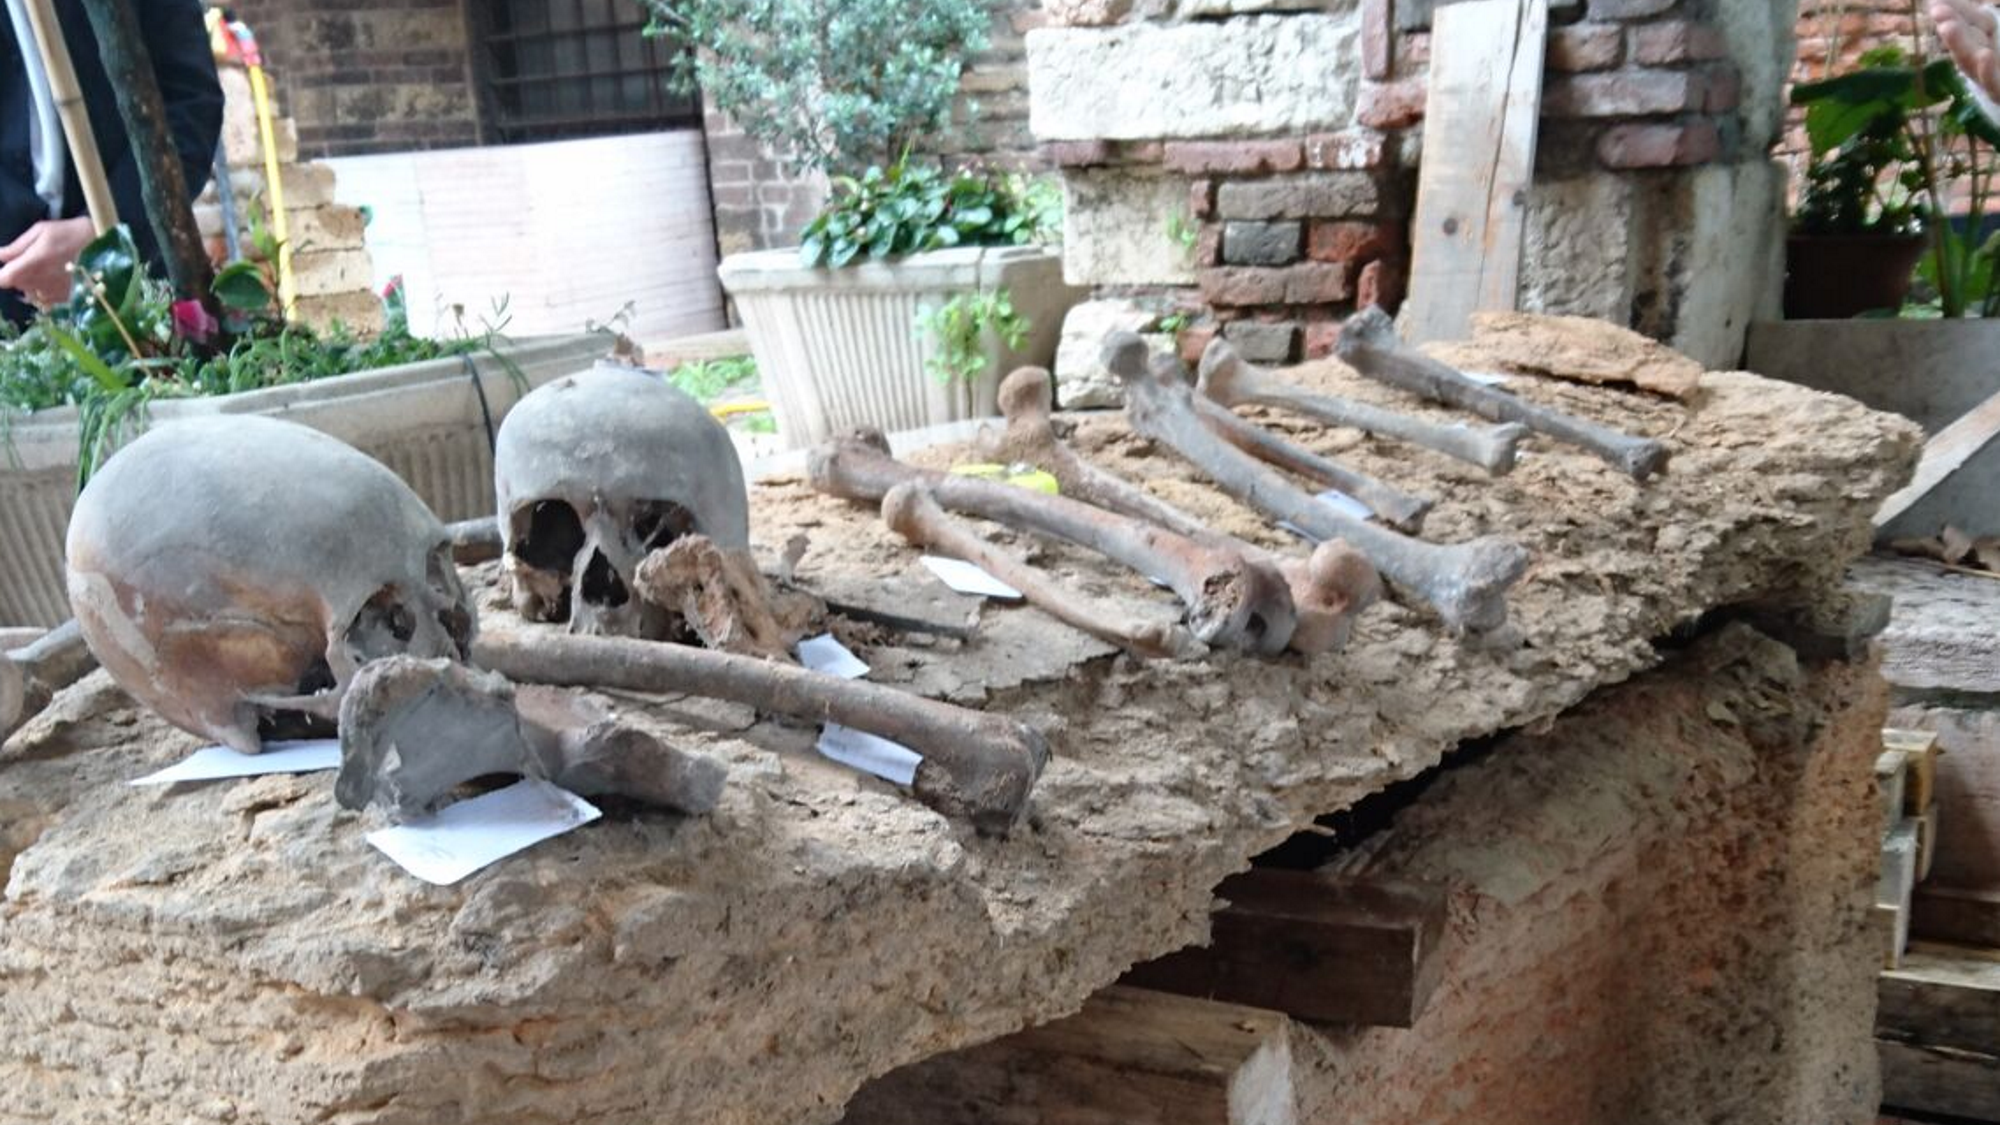 In the sarcophagus found in Verona, the Templars' cross was carved. Photo of Giampero Bagni.